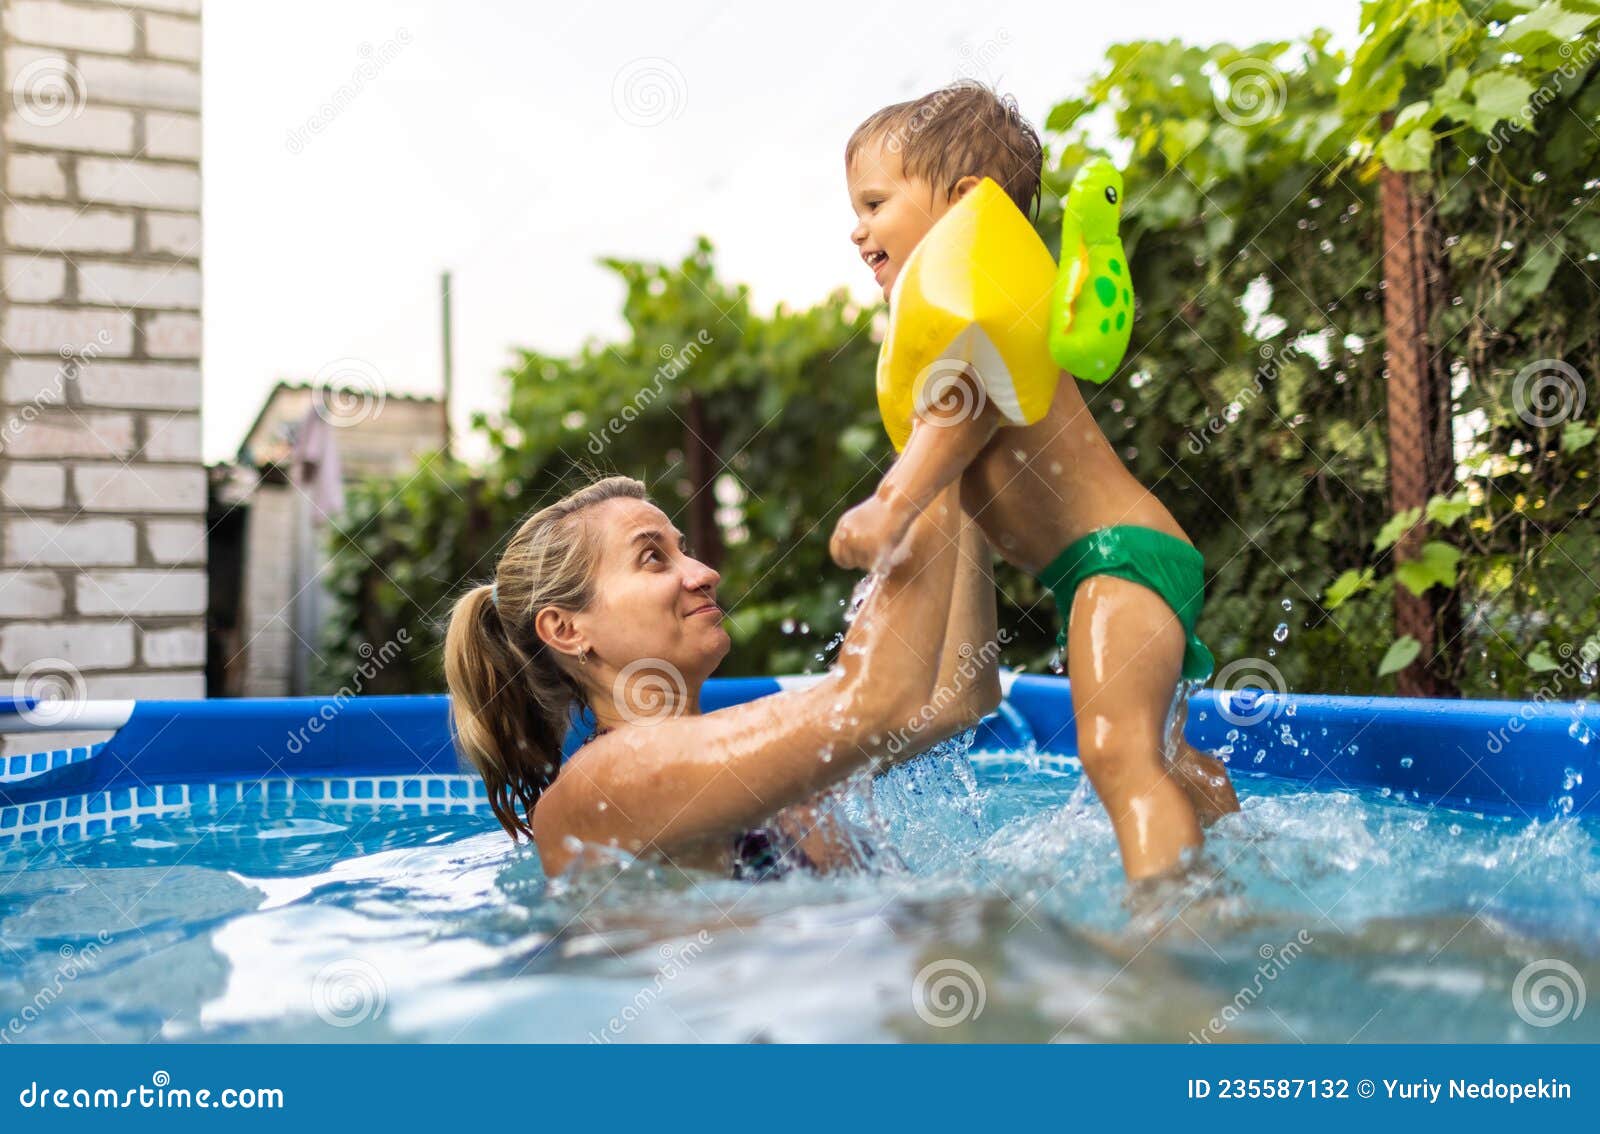 mom and littel naked daughter Beautiful Naked Mother Small Daughter 8 Stock Photo ...